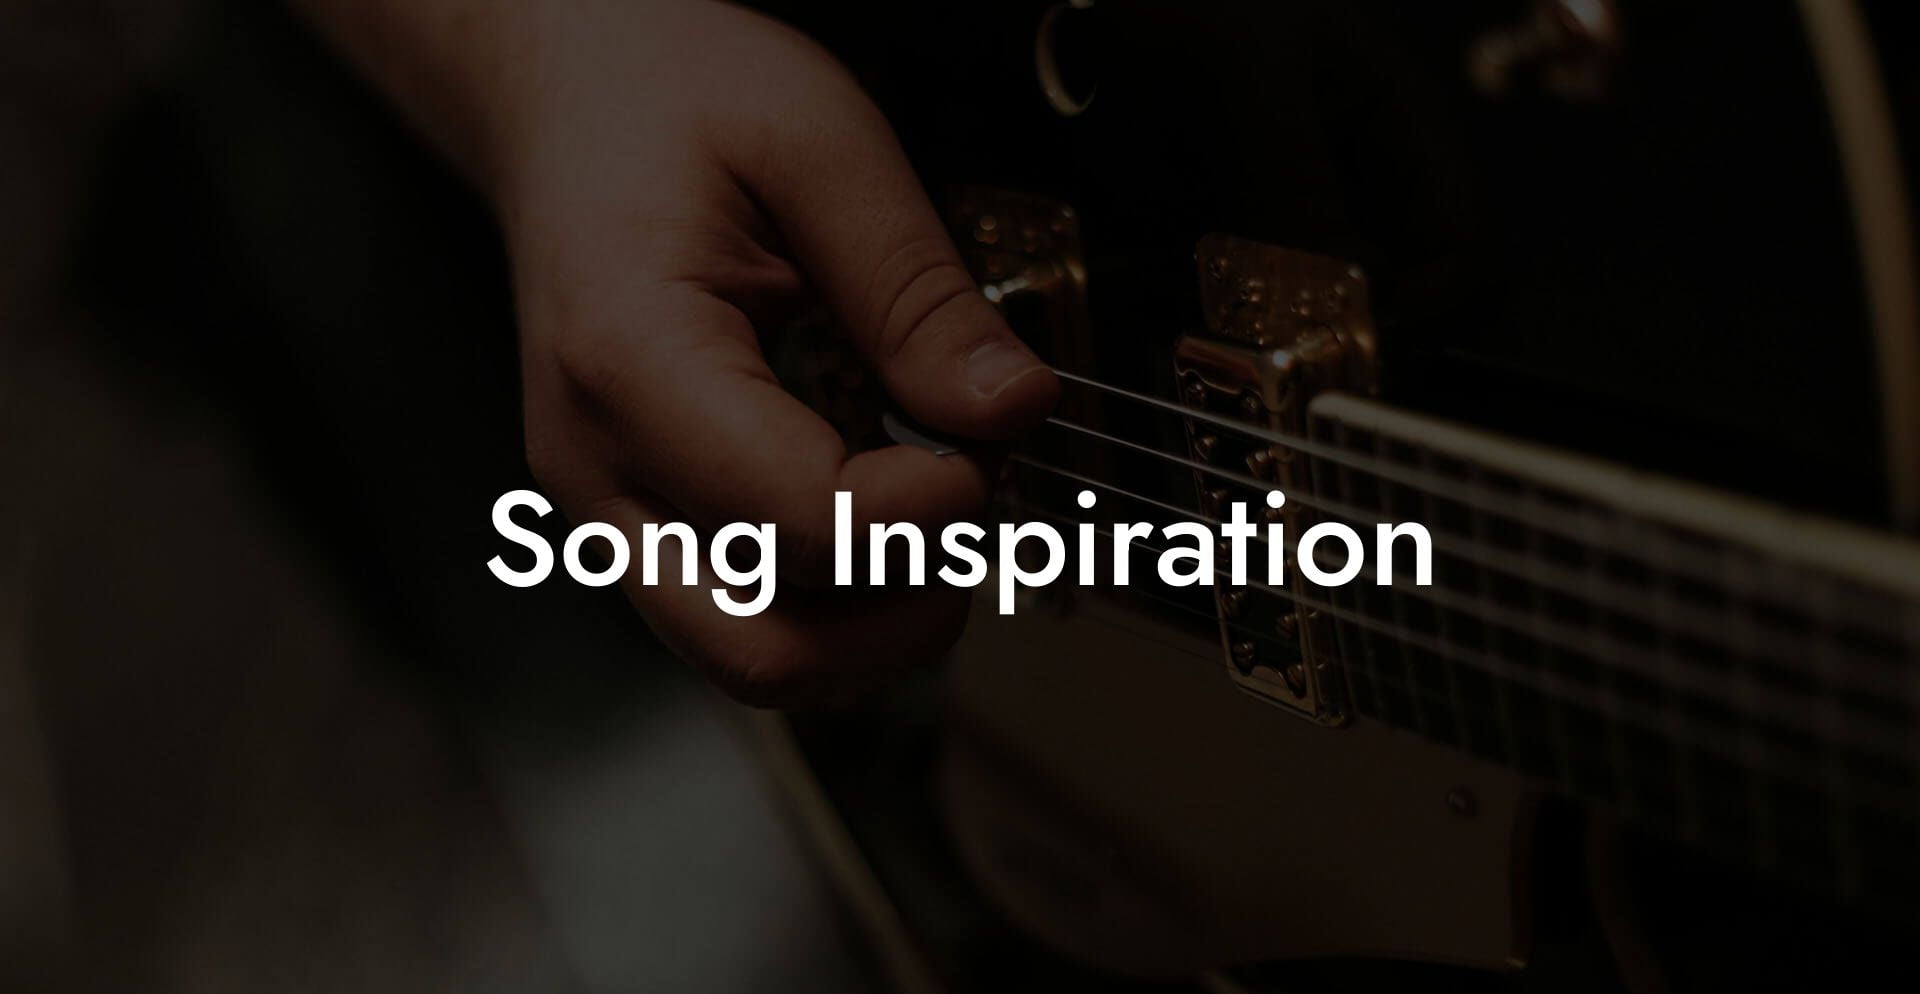 song inspiration lyric assistant